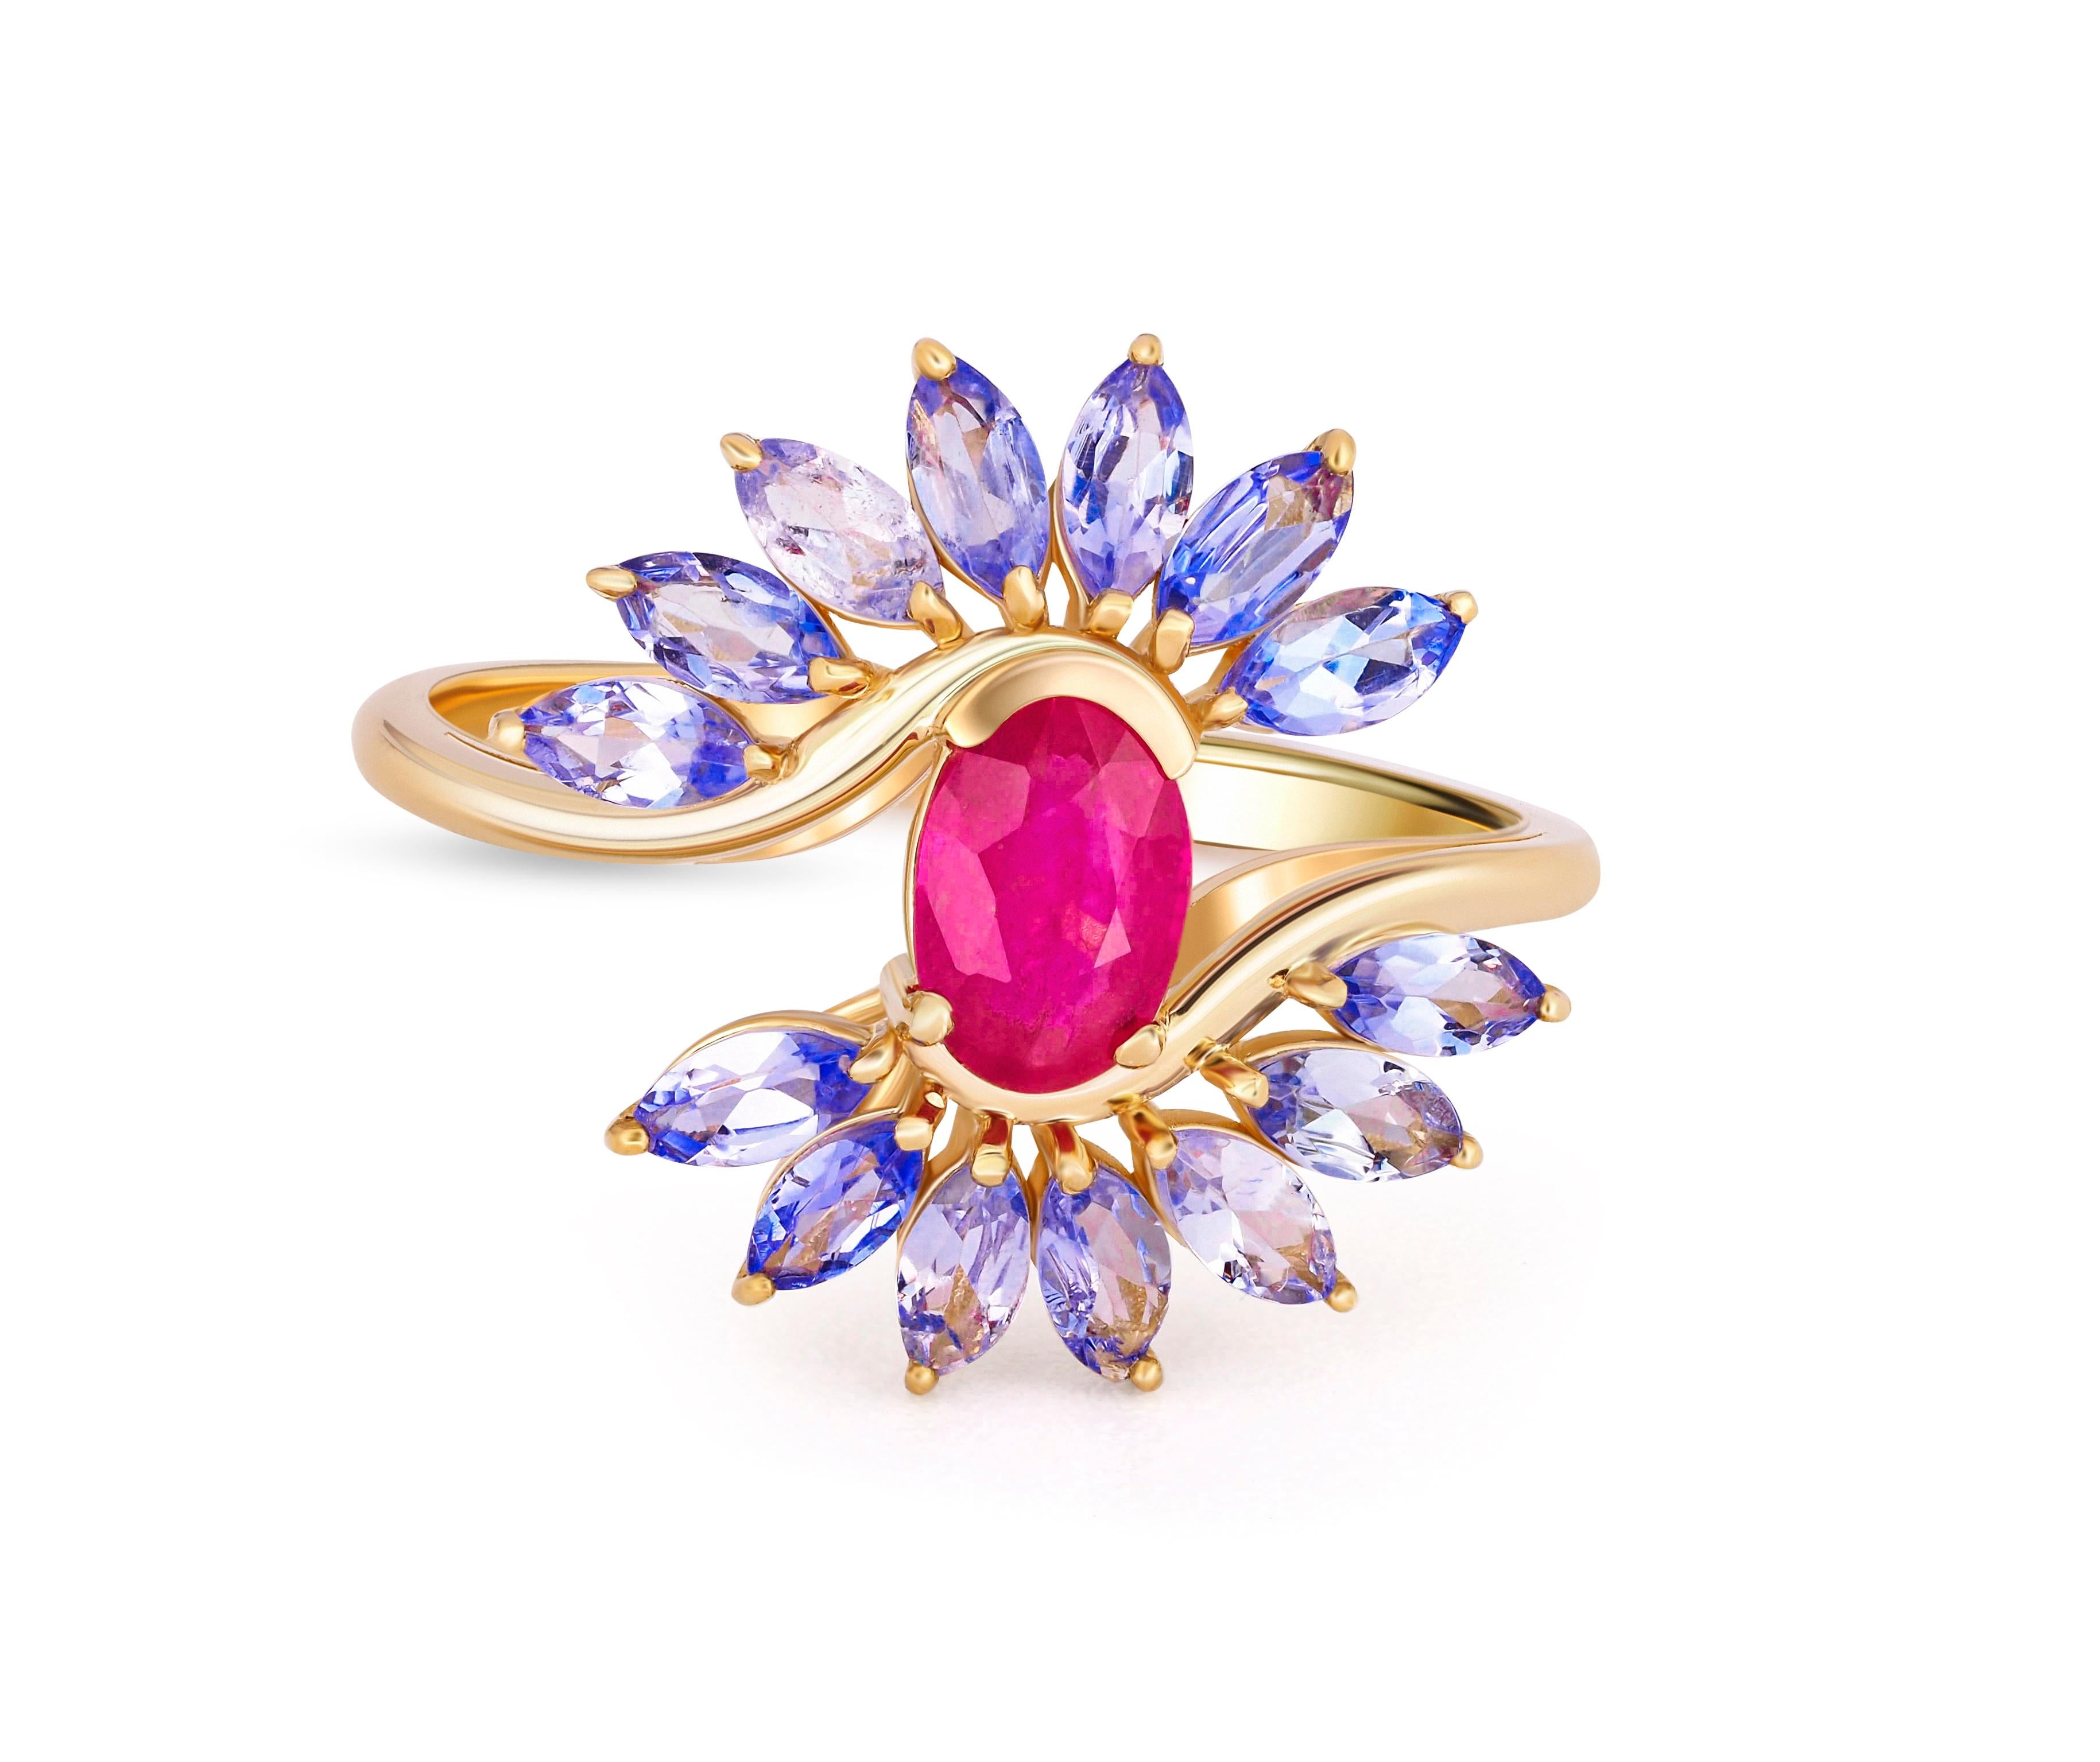 Statement ruby ring. 
Oval ruby, marquise tanzanite 14k gold ring. Cocktail ruby ring. Unique design ruby ring. Aniversary gift for her.

Size rings face: 18.5 x 14 mm.
Total weight: 2.3 g. depends from size.
Metal: 14k gold

Central stone: